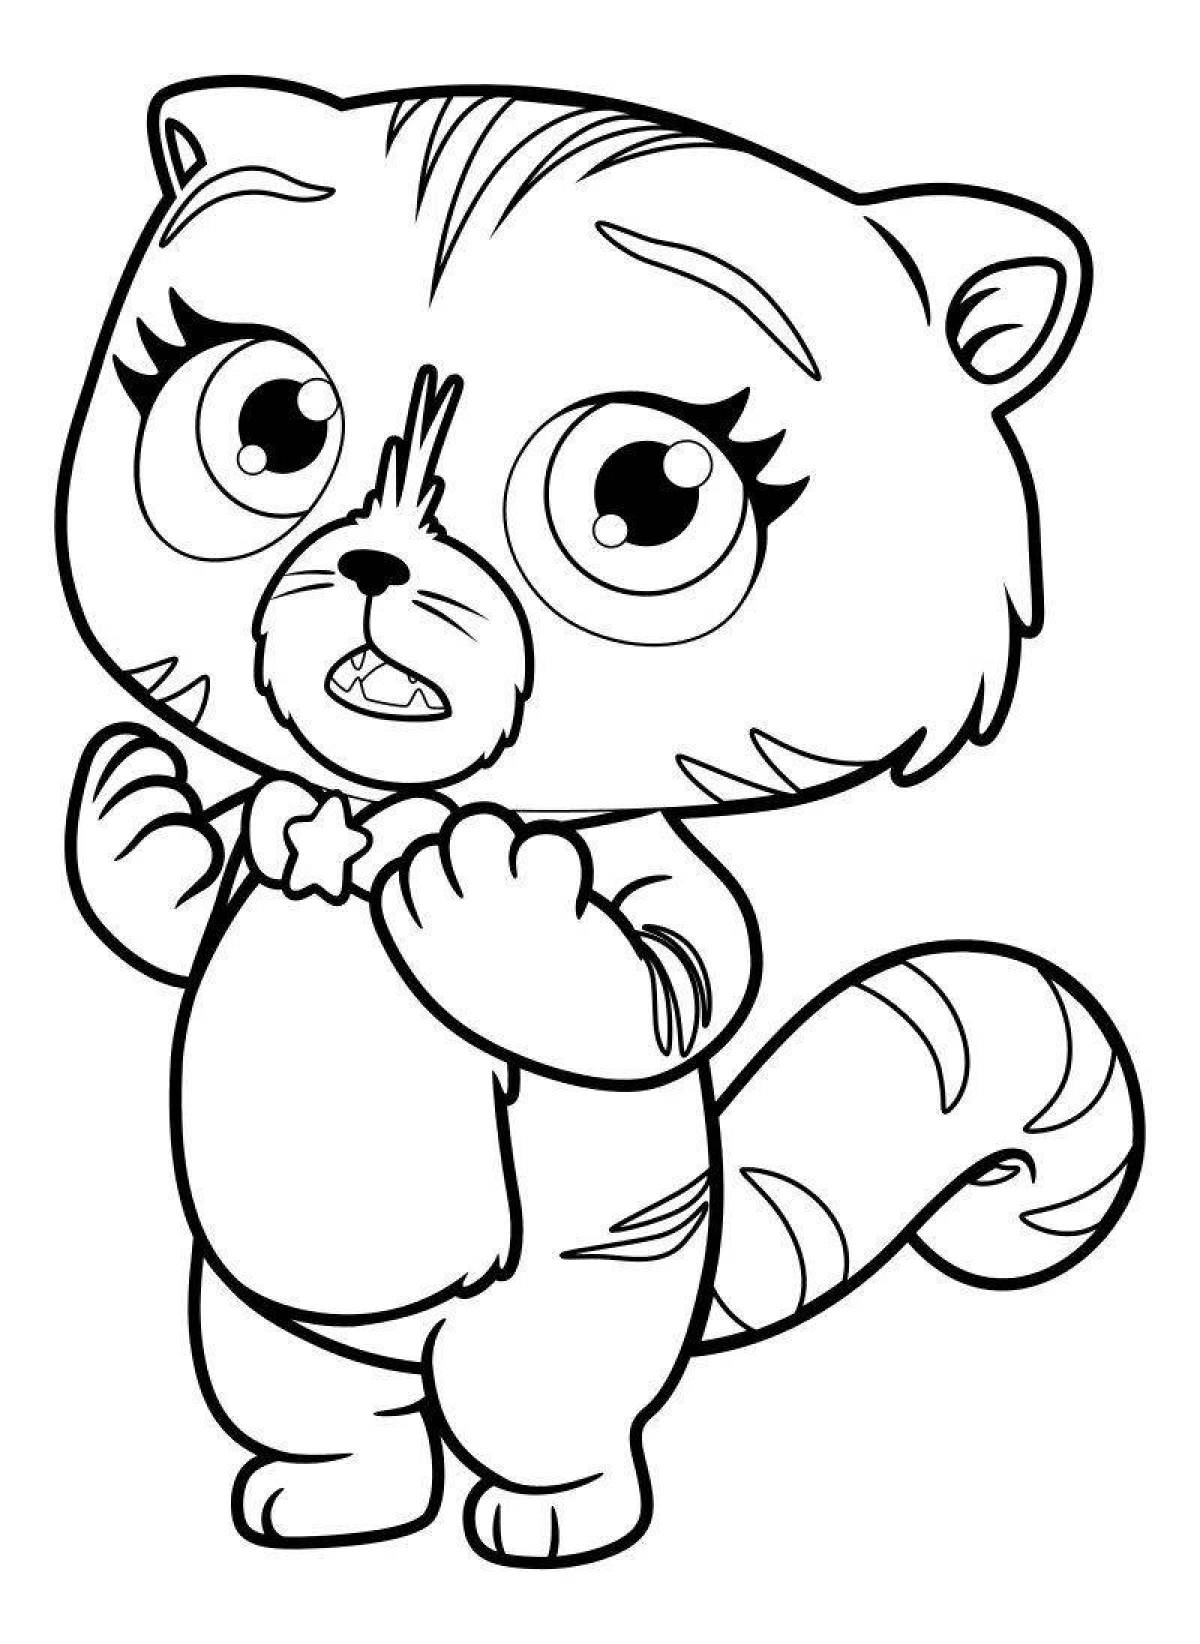 Naughty little kittens coloring page